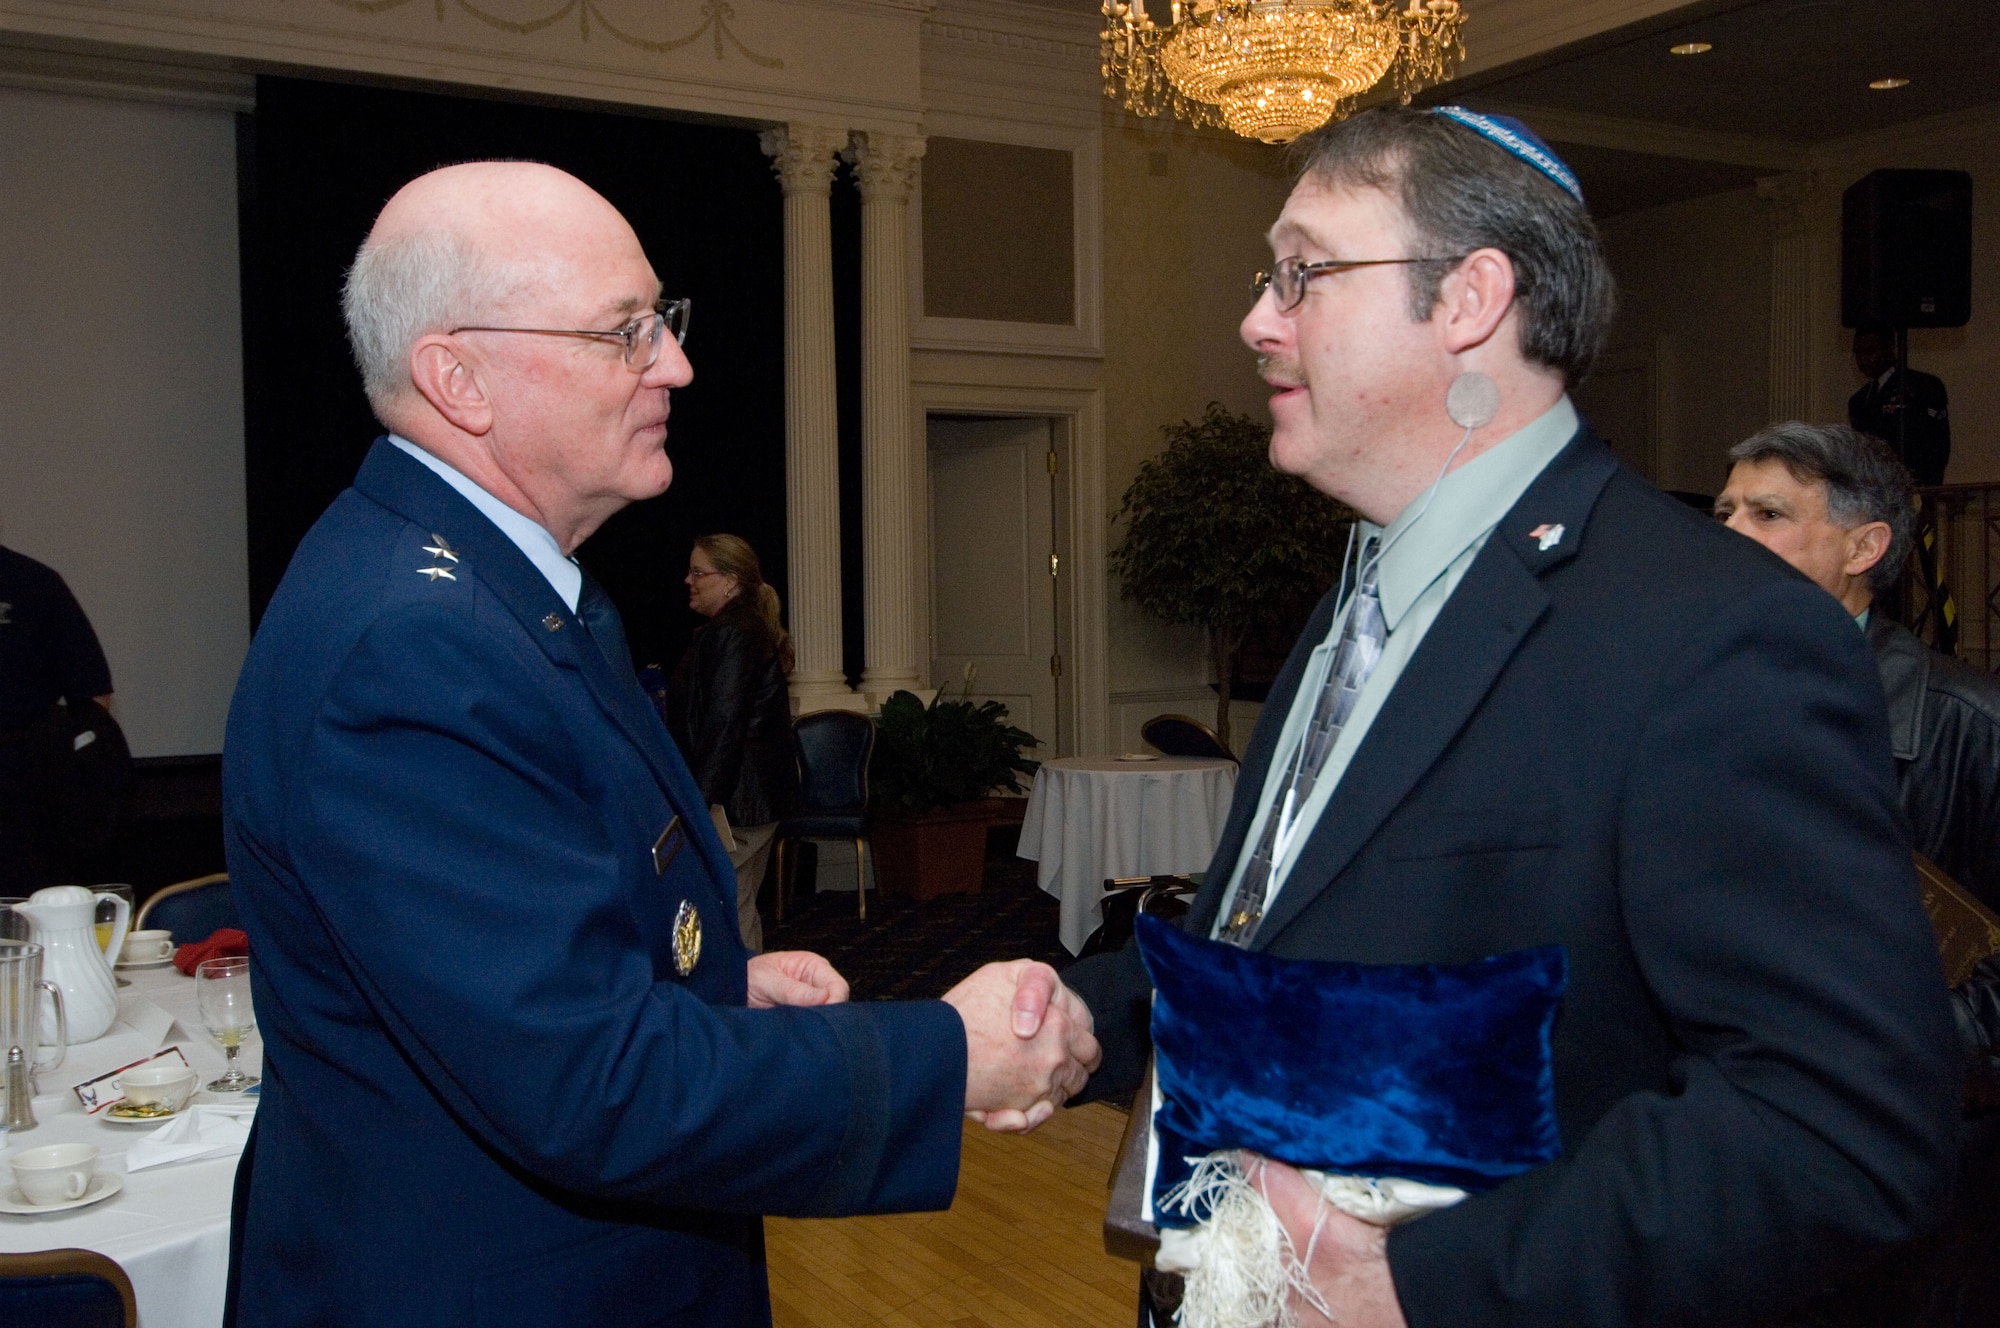 Chap. (Maj. Gen.) Cecil Richardson greets Senior Master Sgt. (ret.) Dave Berry at the Maxwell-Gunter National Prayer Breakfast Feb. 13 at the Maxwell Officers’ Club. Chaplain Richardson, chief of Chaplains for the Air Force, was the keynote speaker.  Sergeant Berry is a local Jewish lay leader. (Air Force photo by Melanie Rodgers Cox)